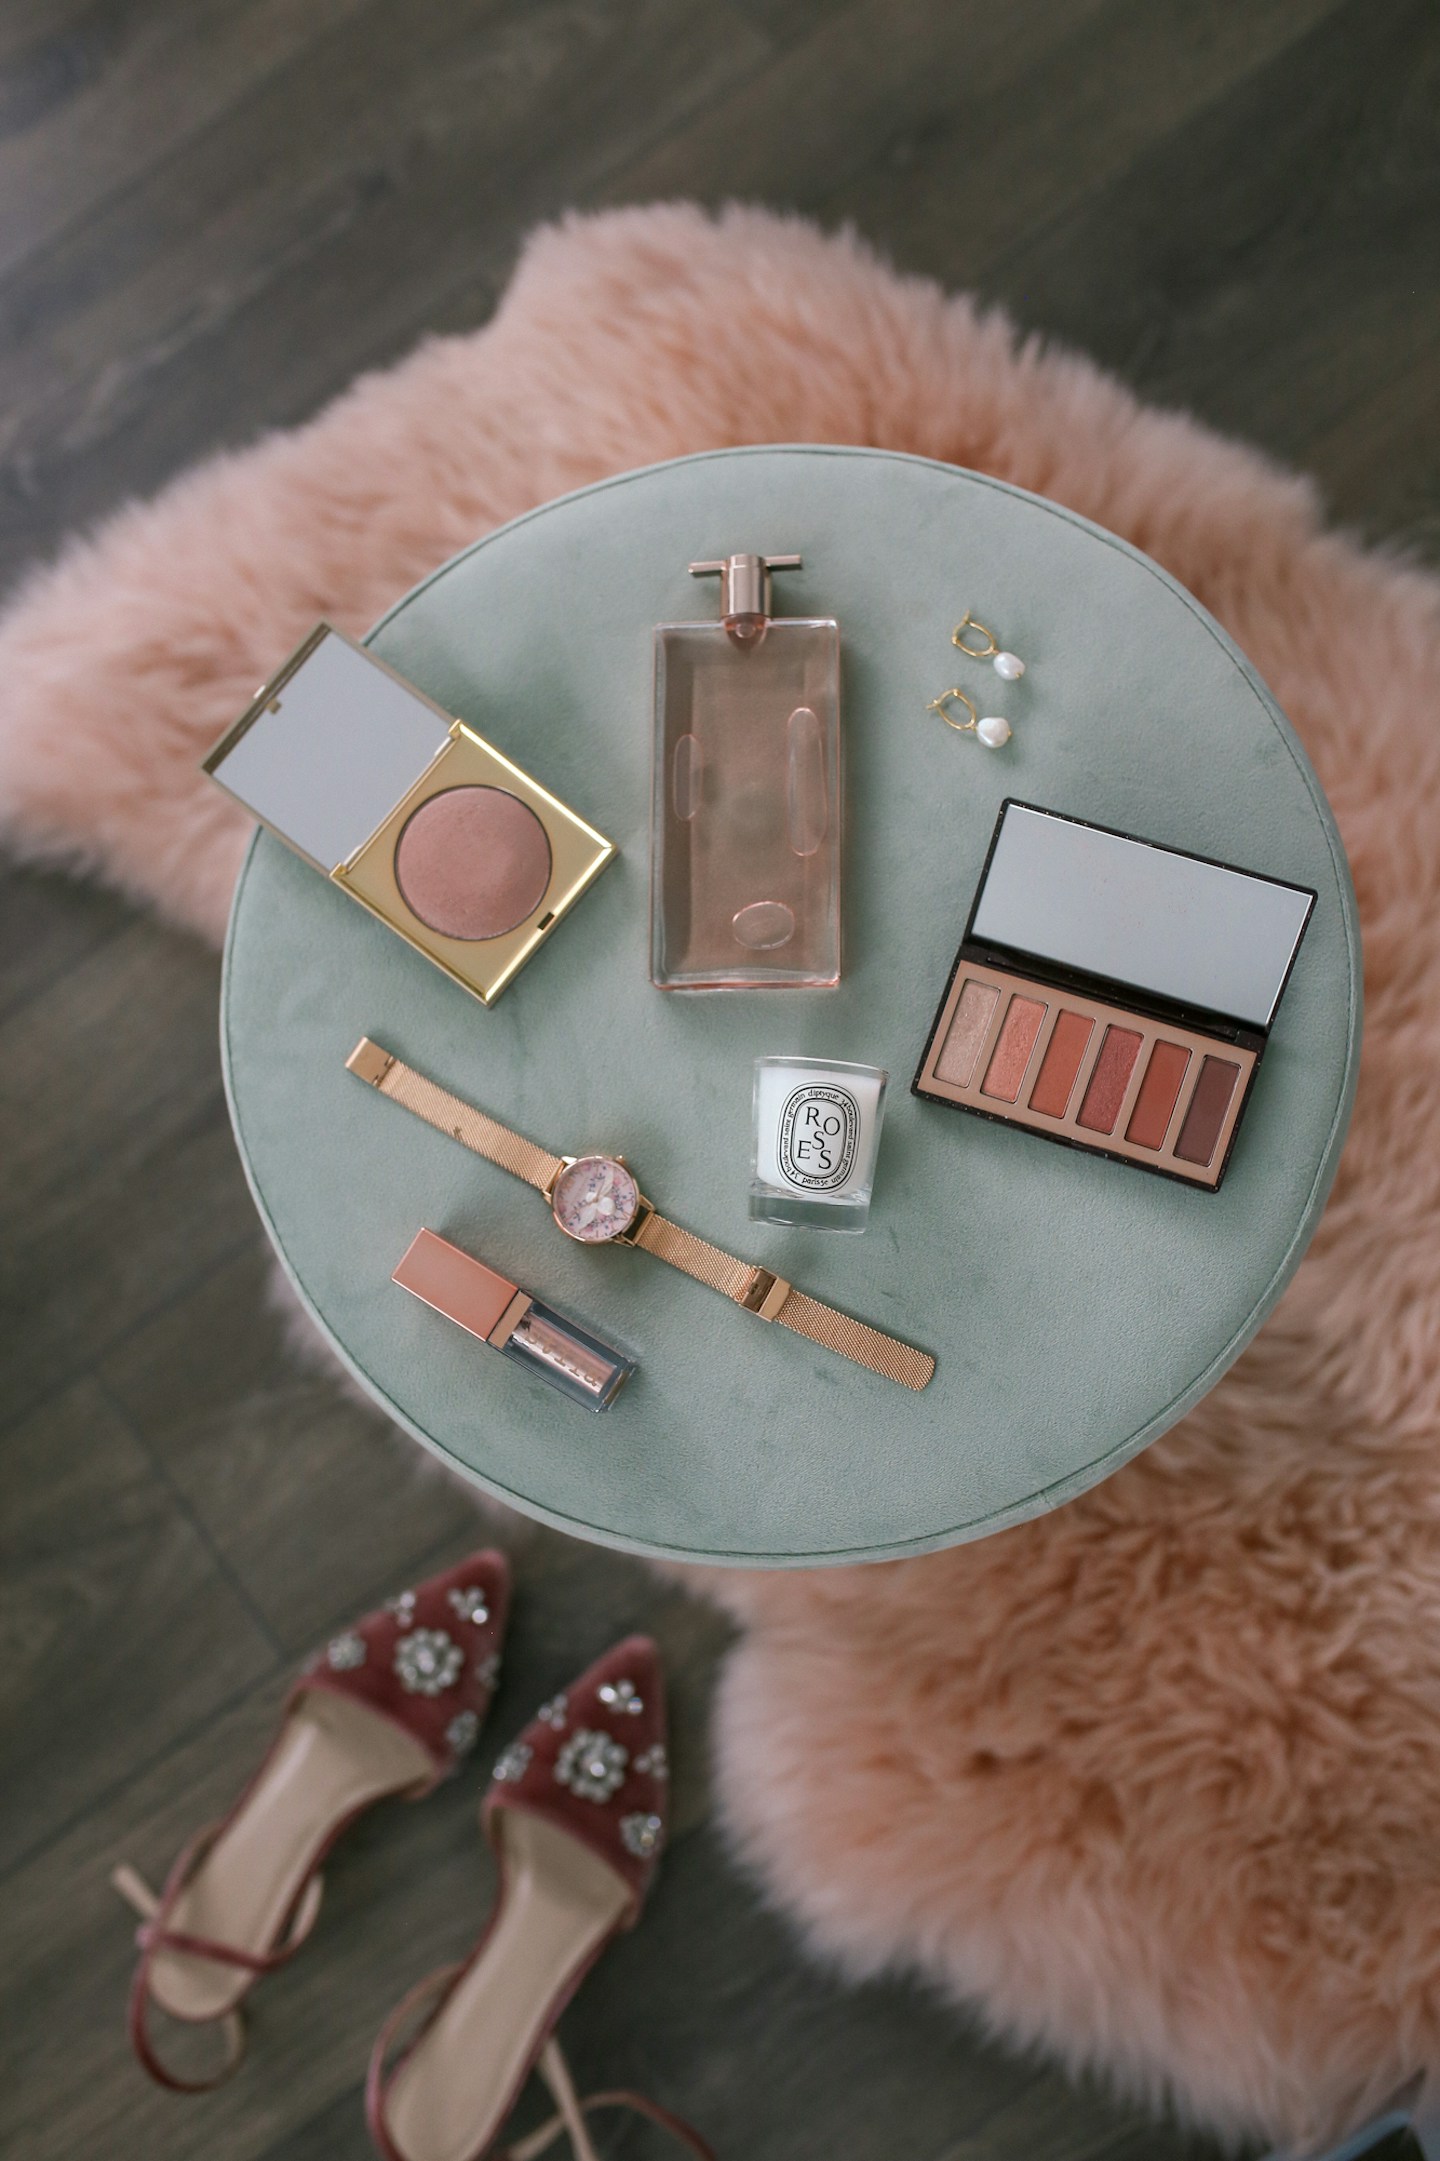 Valentine's Day Gift Ideas: From pretty Charlotte Tilbury eyeshadow to sumptuous fragrance or pearl earrings, my gift ideas are perfect at any price point!